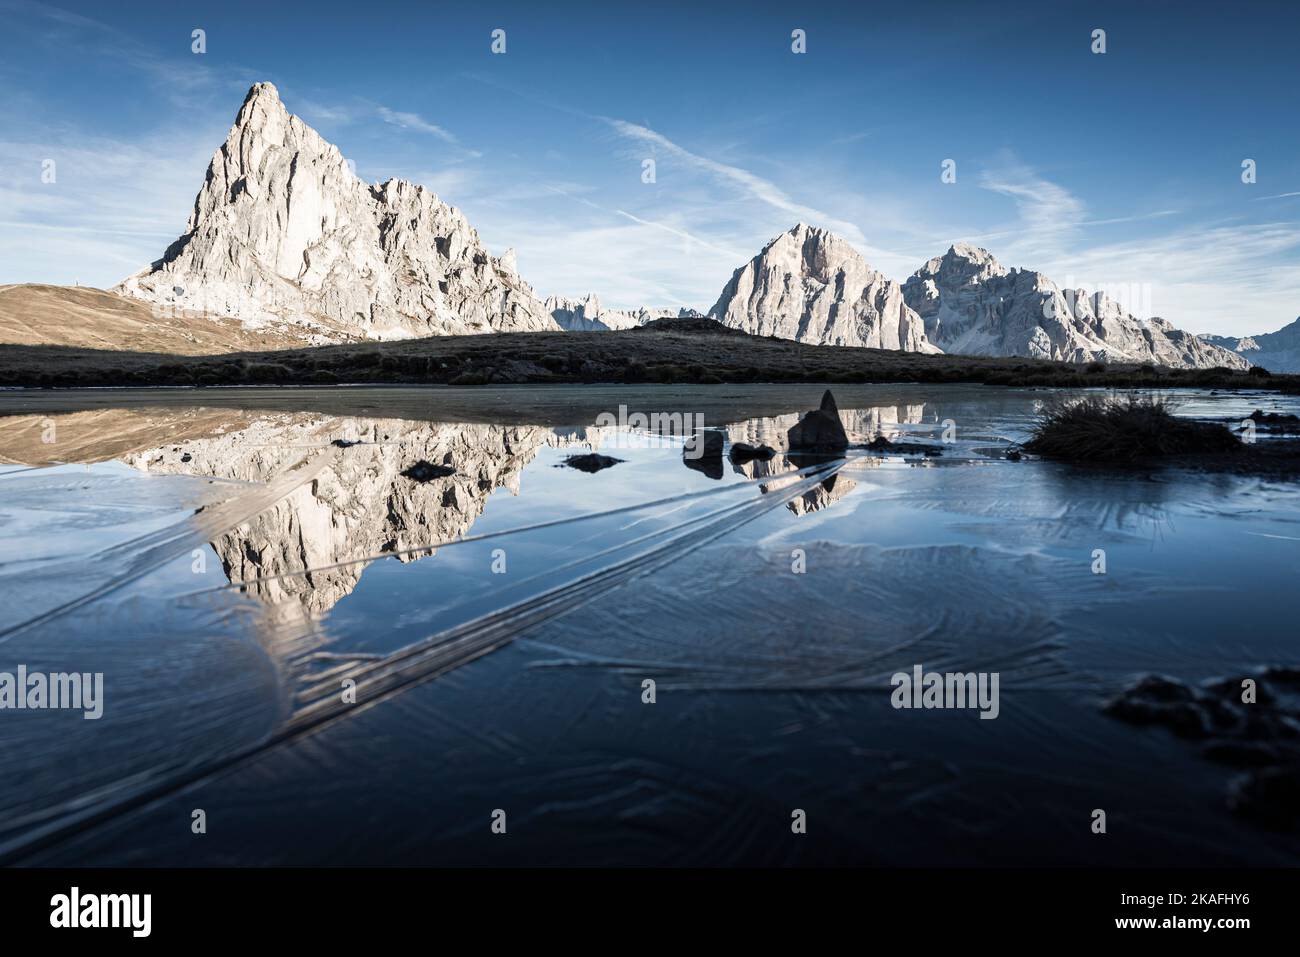 The Ra Gusela and Tofane di Rozes mountains reflected in the water and ice of a lake on a frosty autumn morning at Passo di Giau, Dolomites, Italy Stock Photo